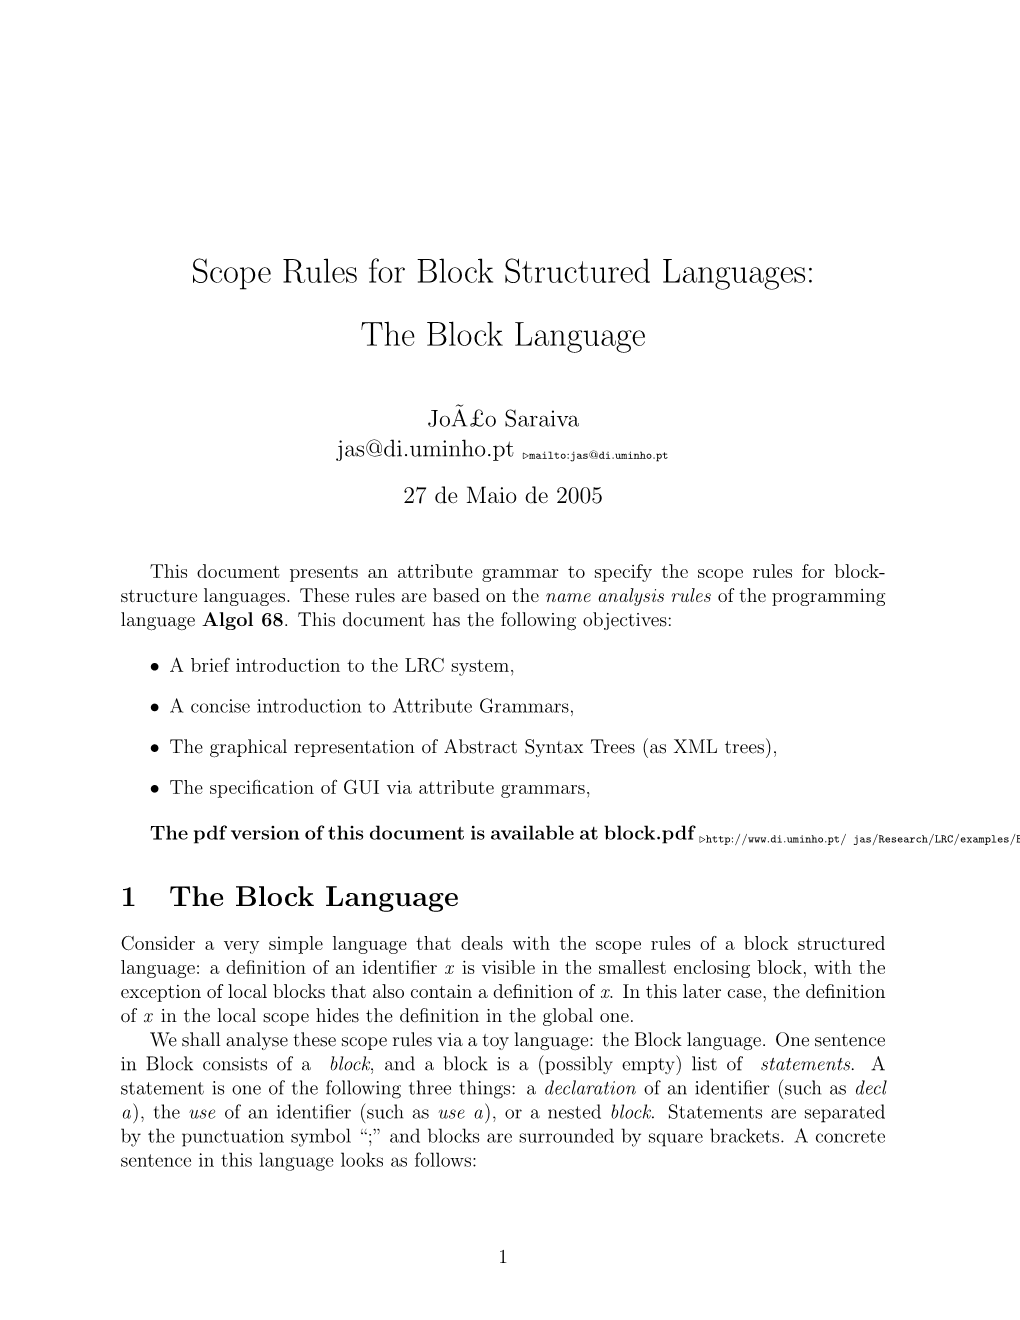 Scope Rules for Block Structured Languages: the Block Language